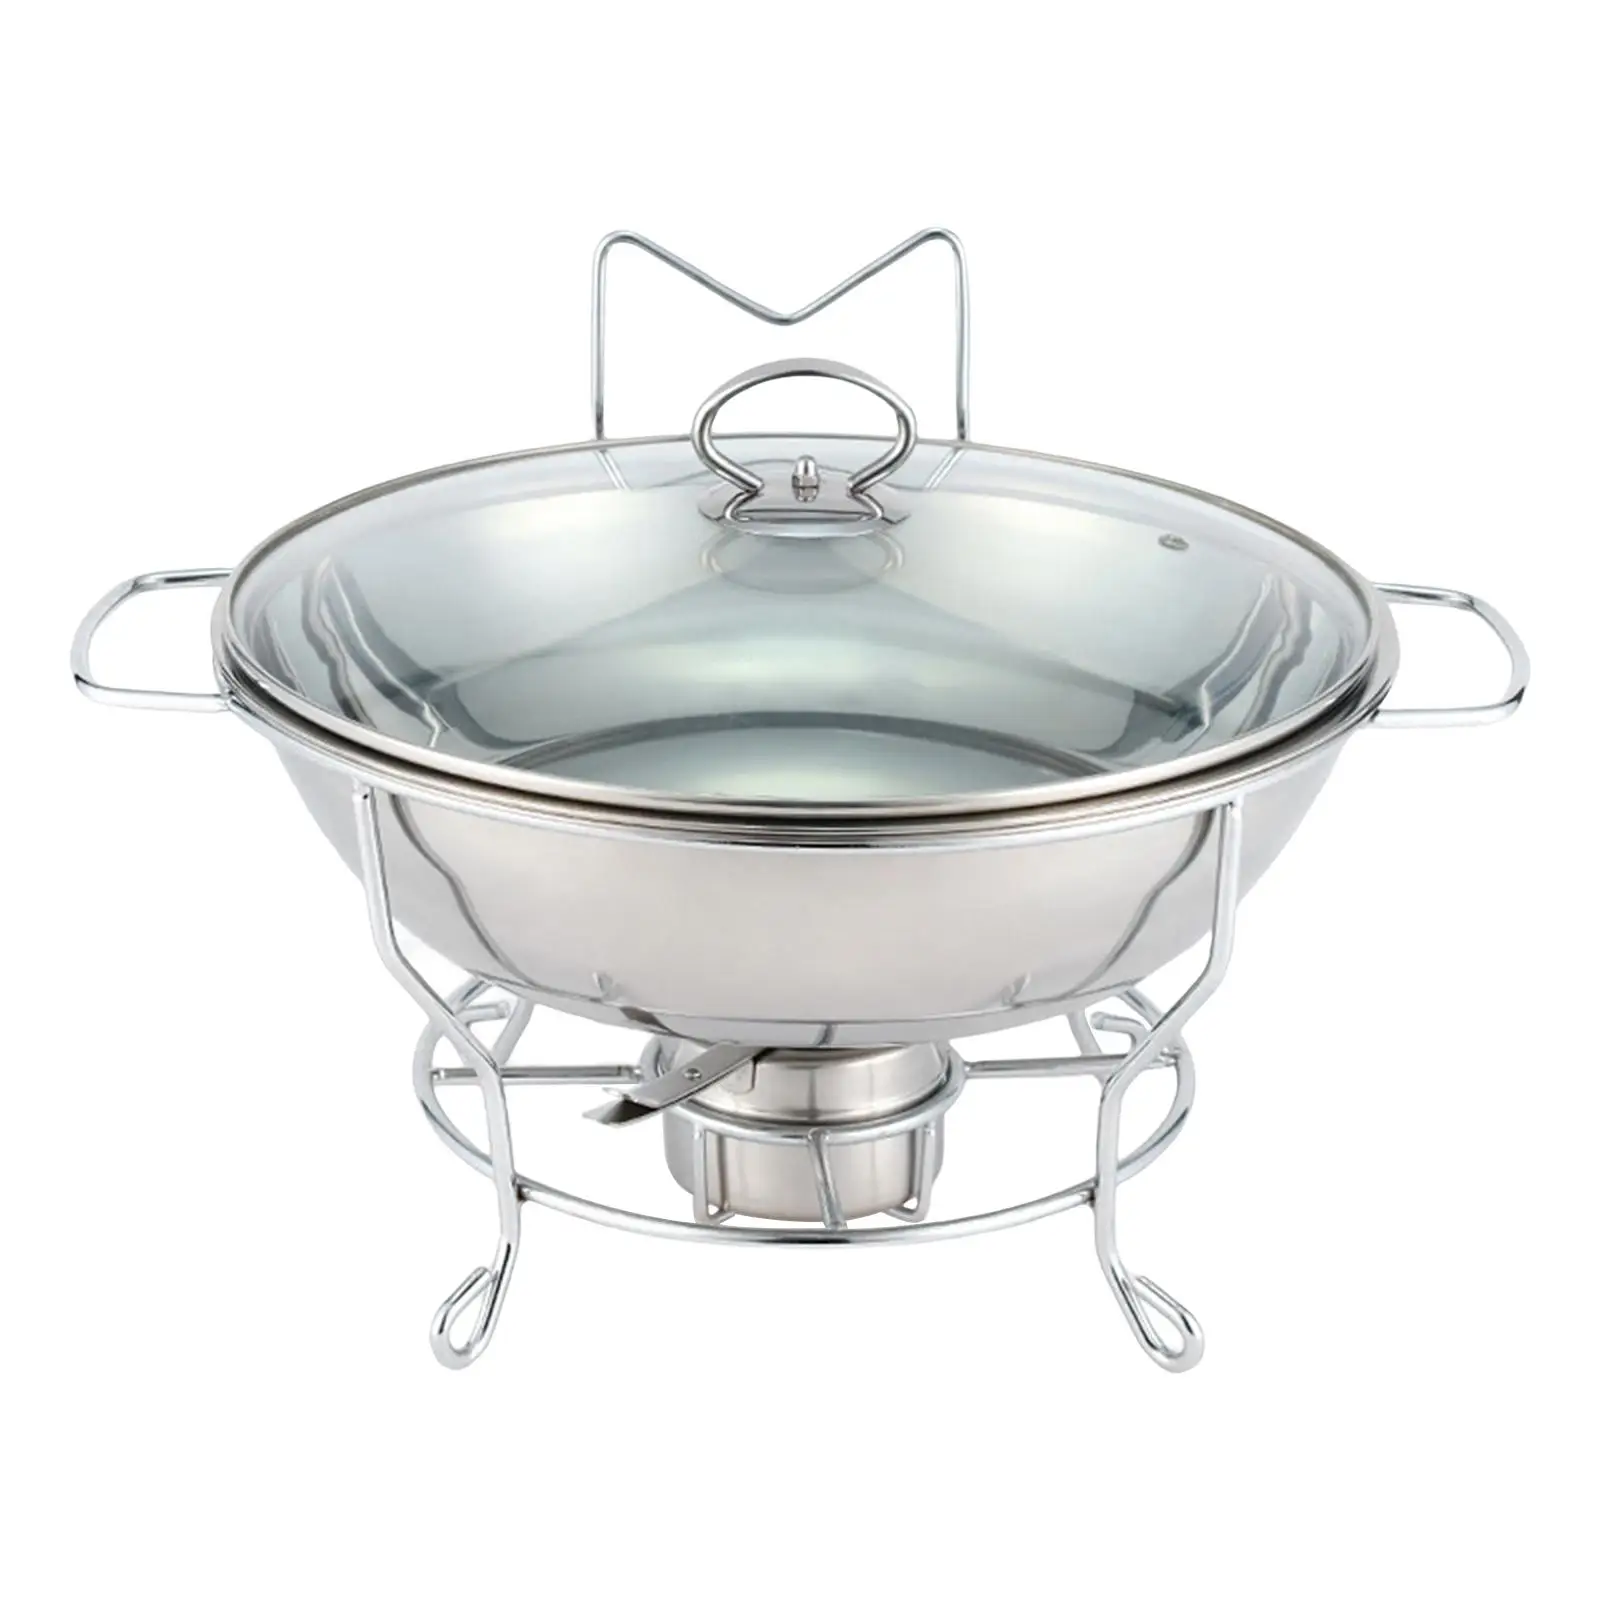 Round Buffet Chafer Durable Multifunction Portable Serving Tray Holder for Catering